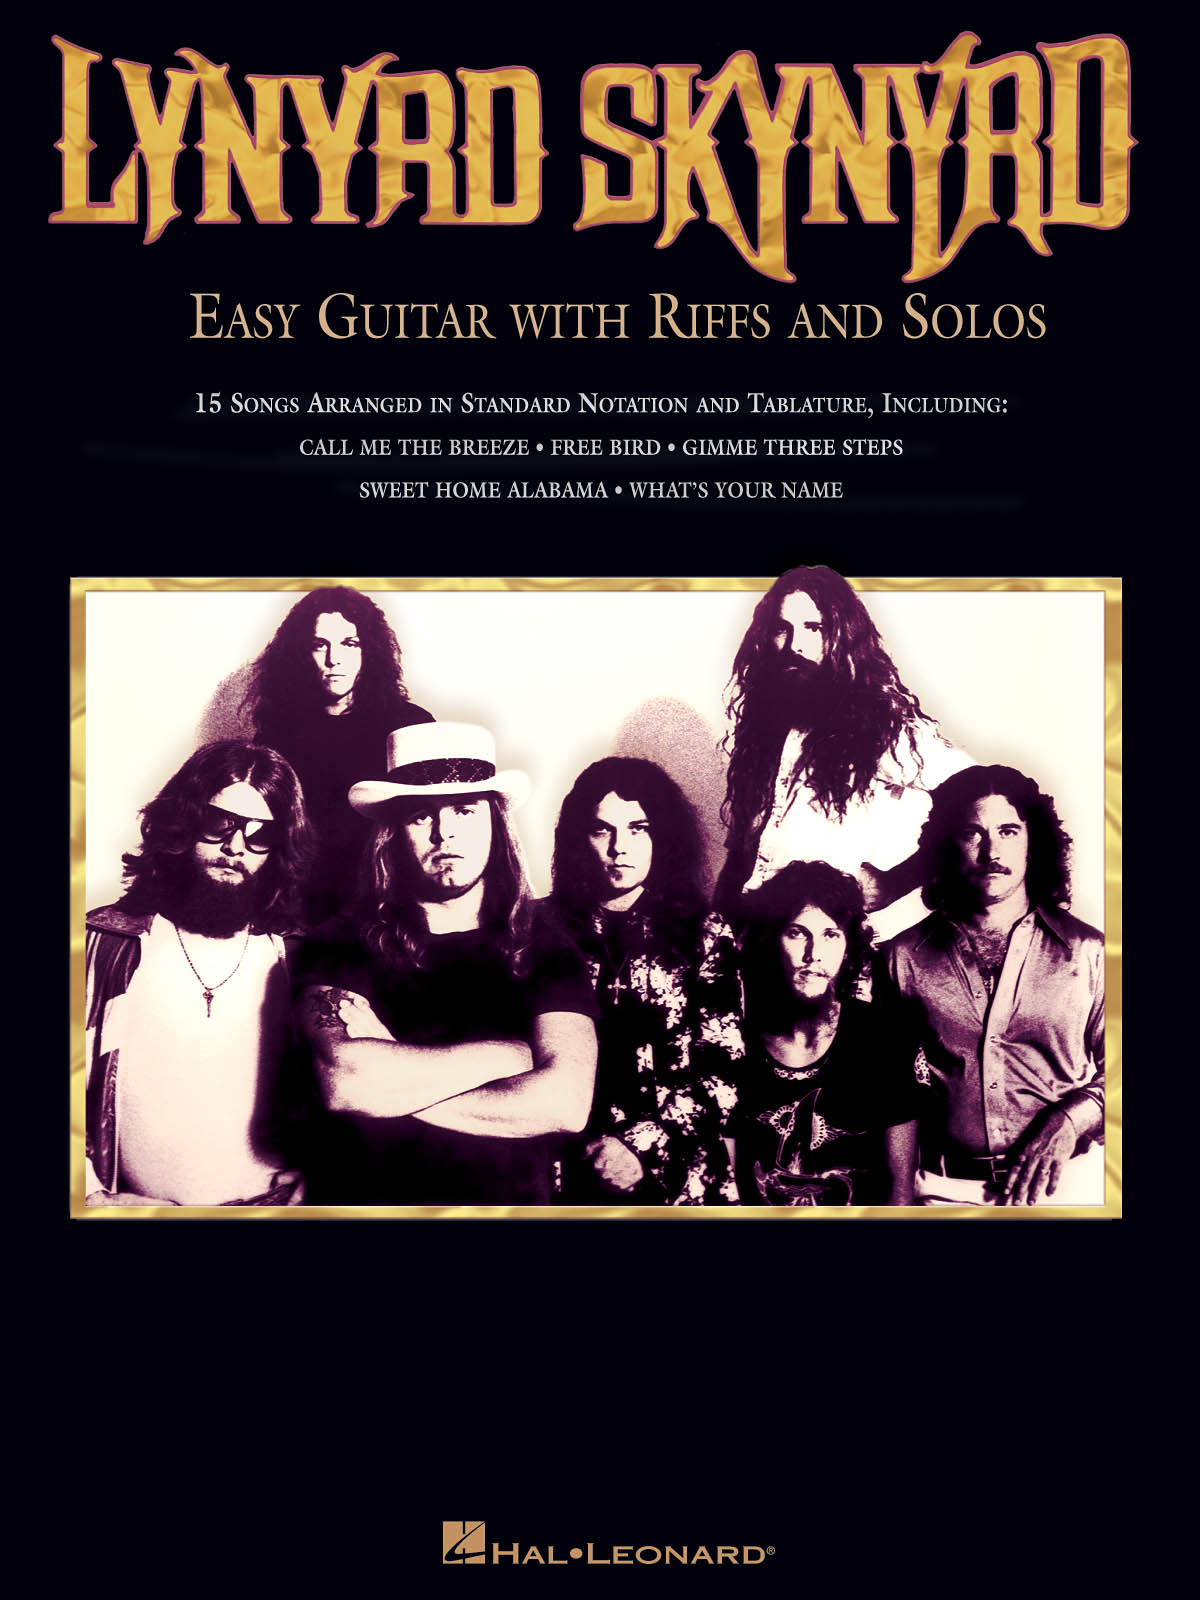 Easy Guitar With Riffs And Solos